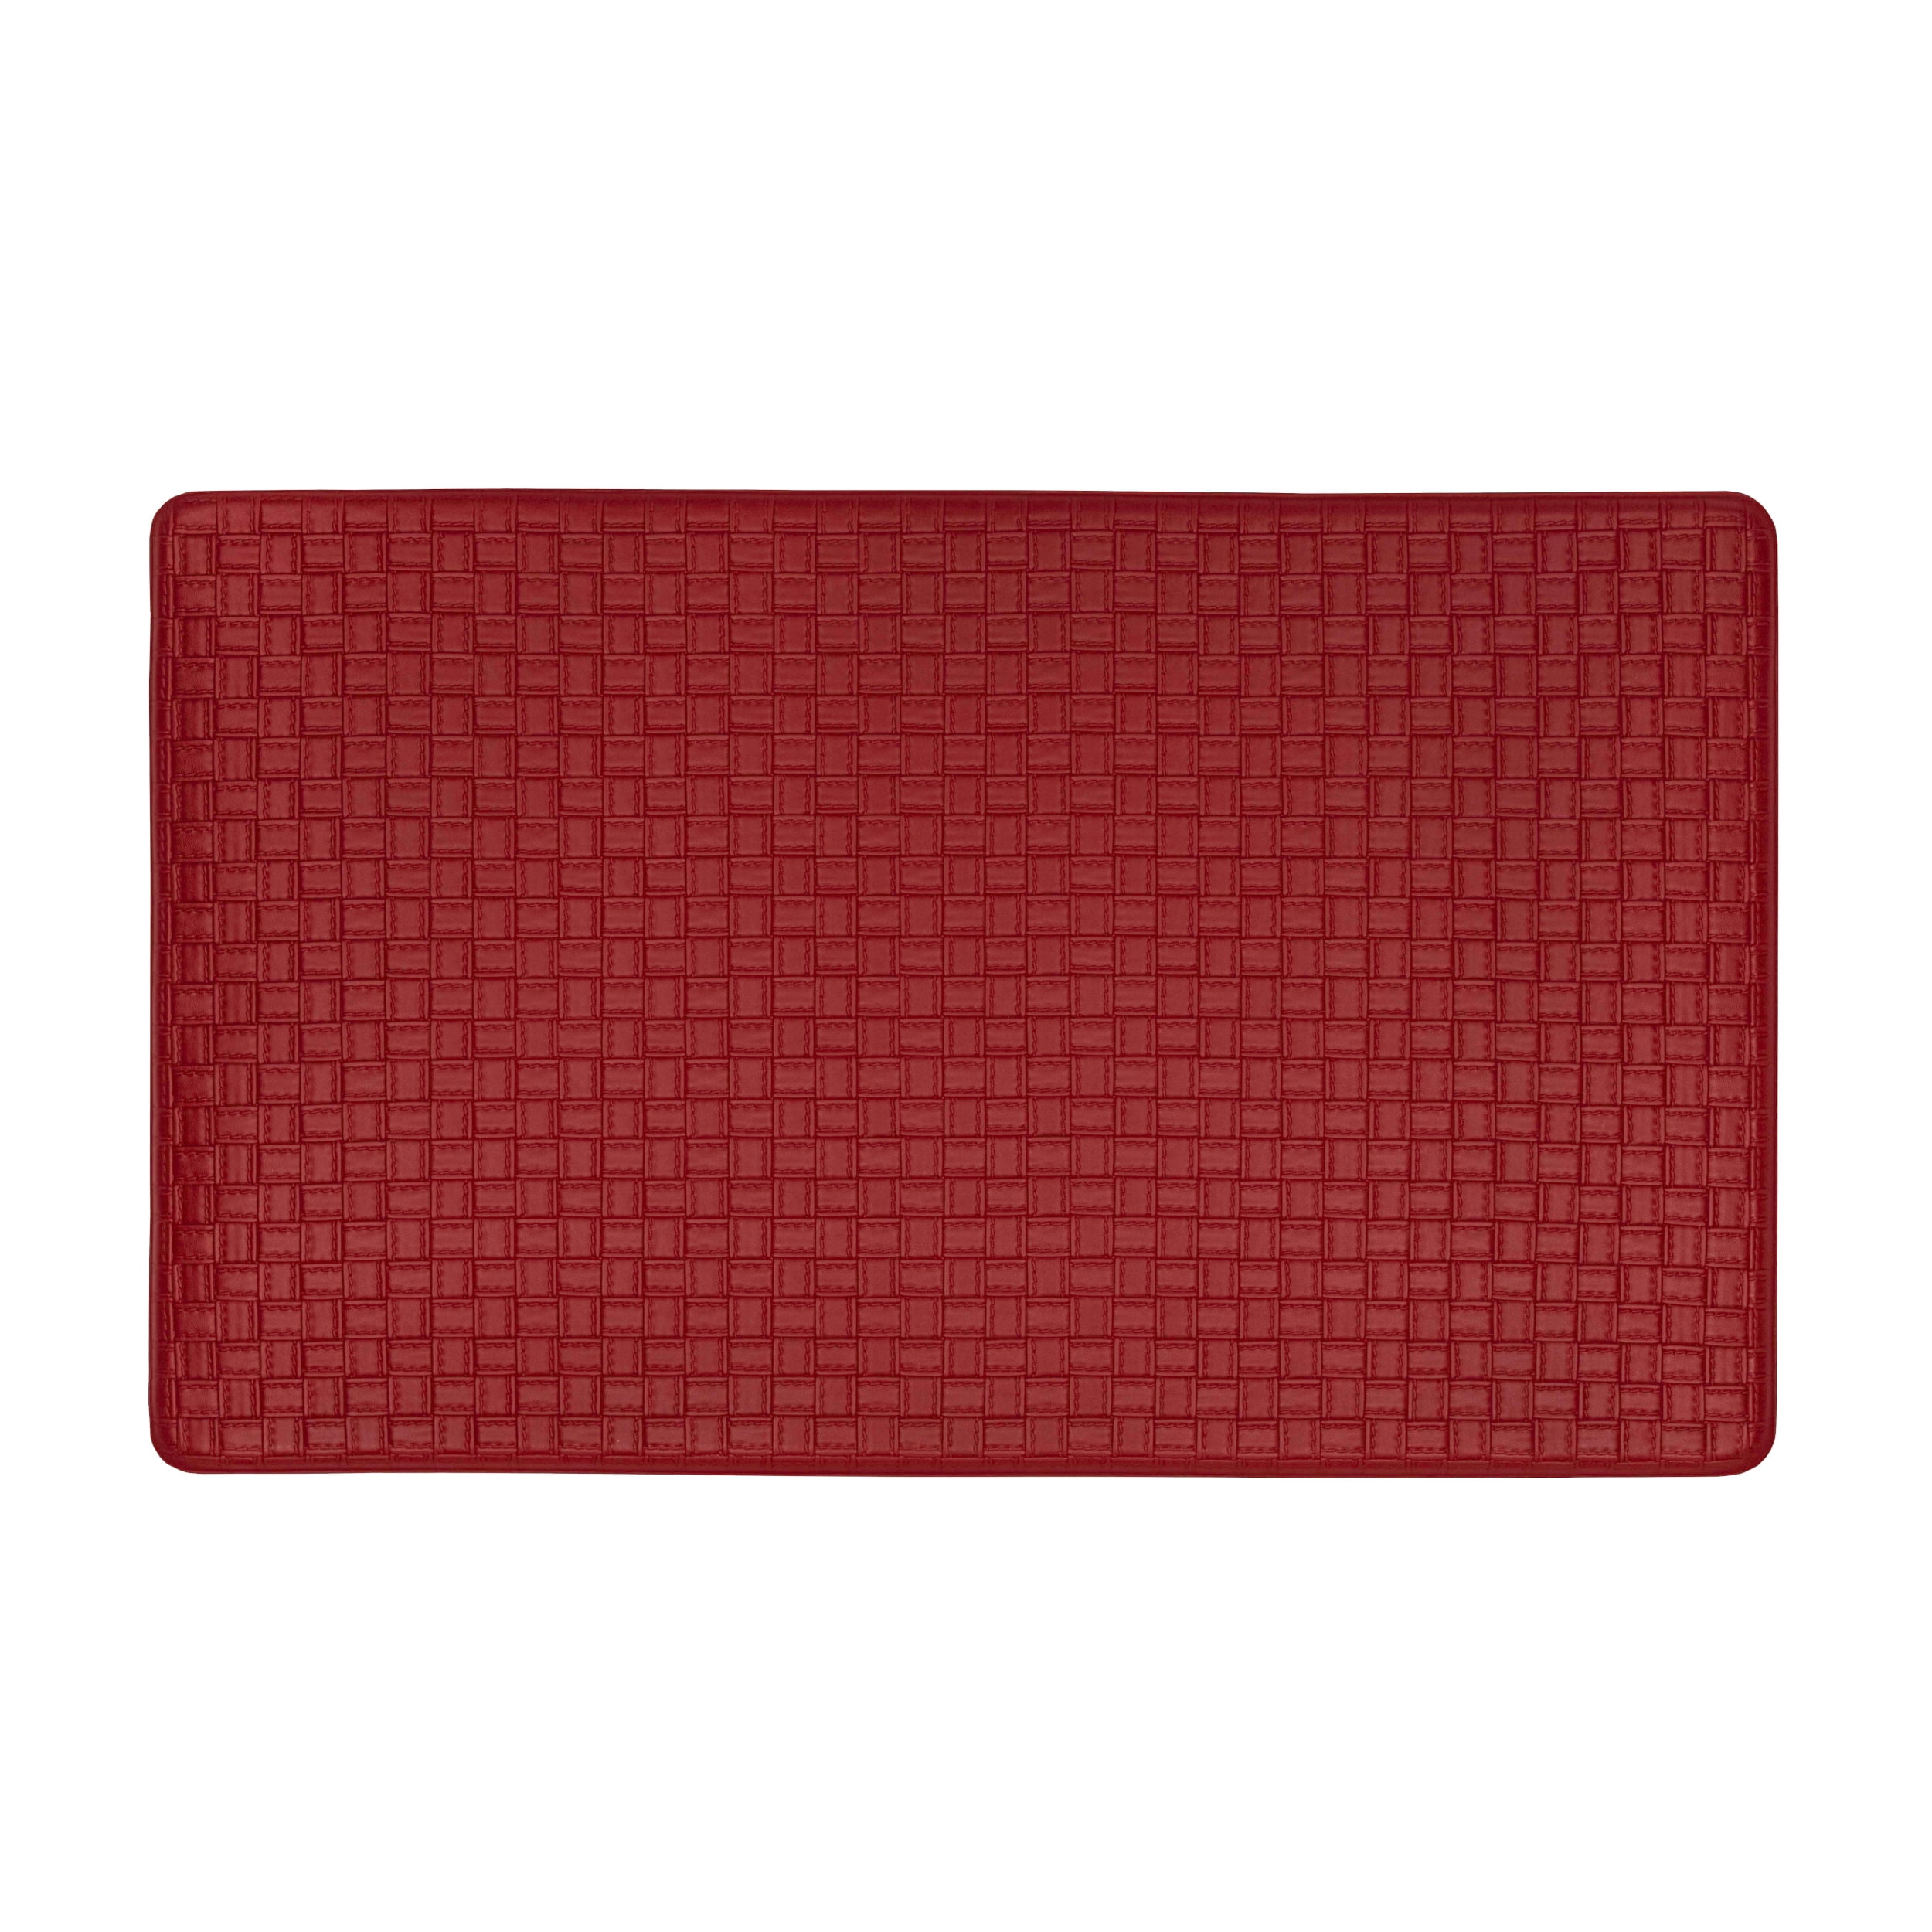 Picture of Achim AF1830LA12 18 x 30 in. Woven-Embossed Faux-Leather Anti-Fatigue Mat, Lava